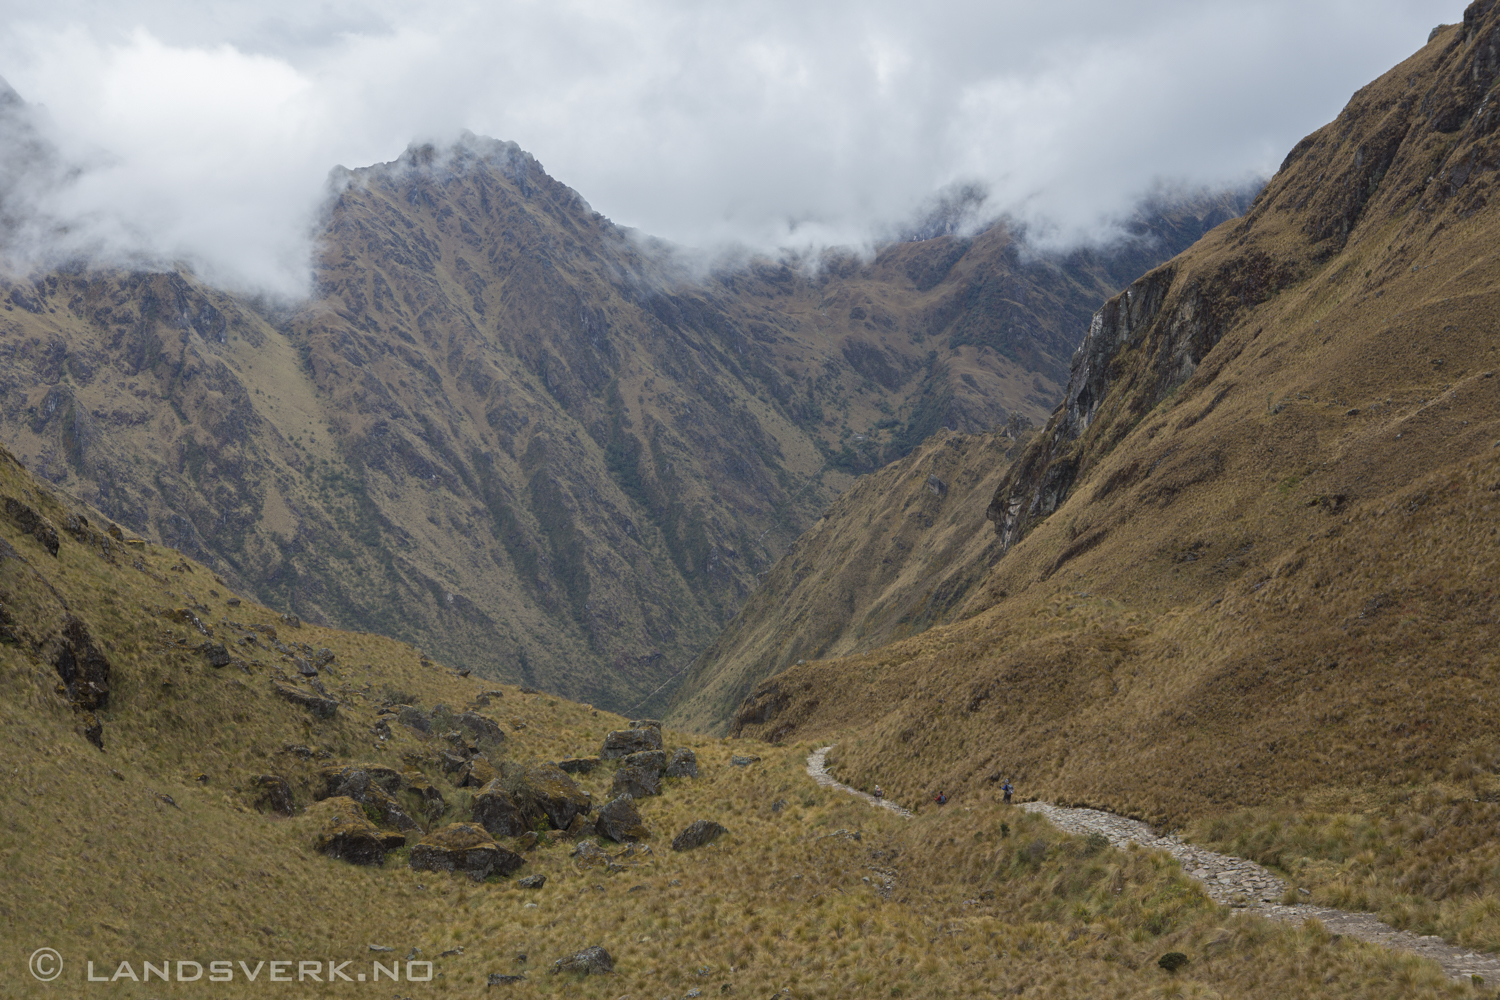 On top of Dead Woman's Pass, 4215 MASL. The Inka Trail to Machu Picchu, Peru. 

(Canon EOS 5D Mark III / Canon EF 24-70mm 
f/2.8 L USM)